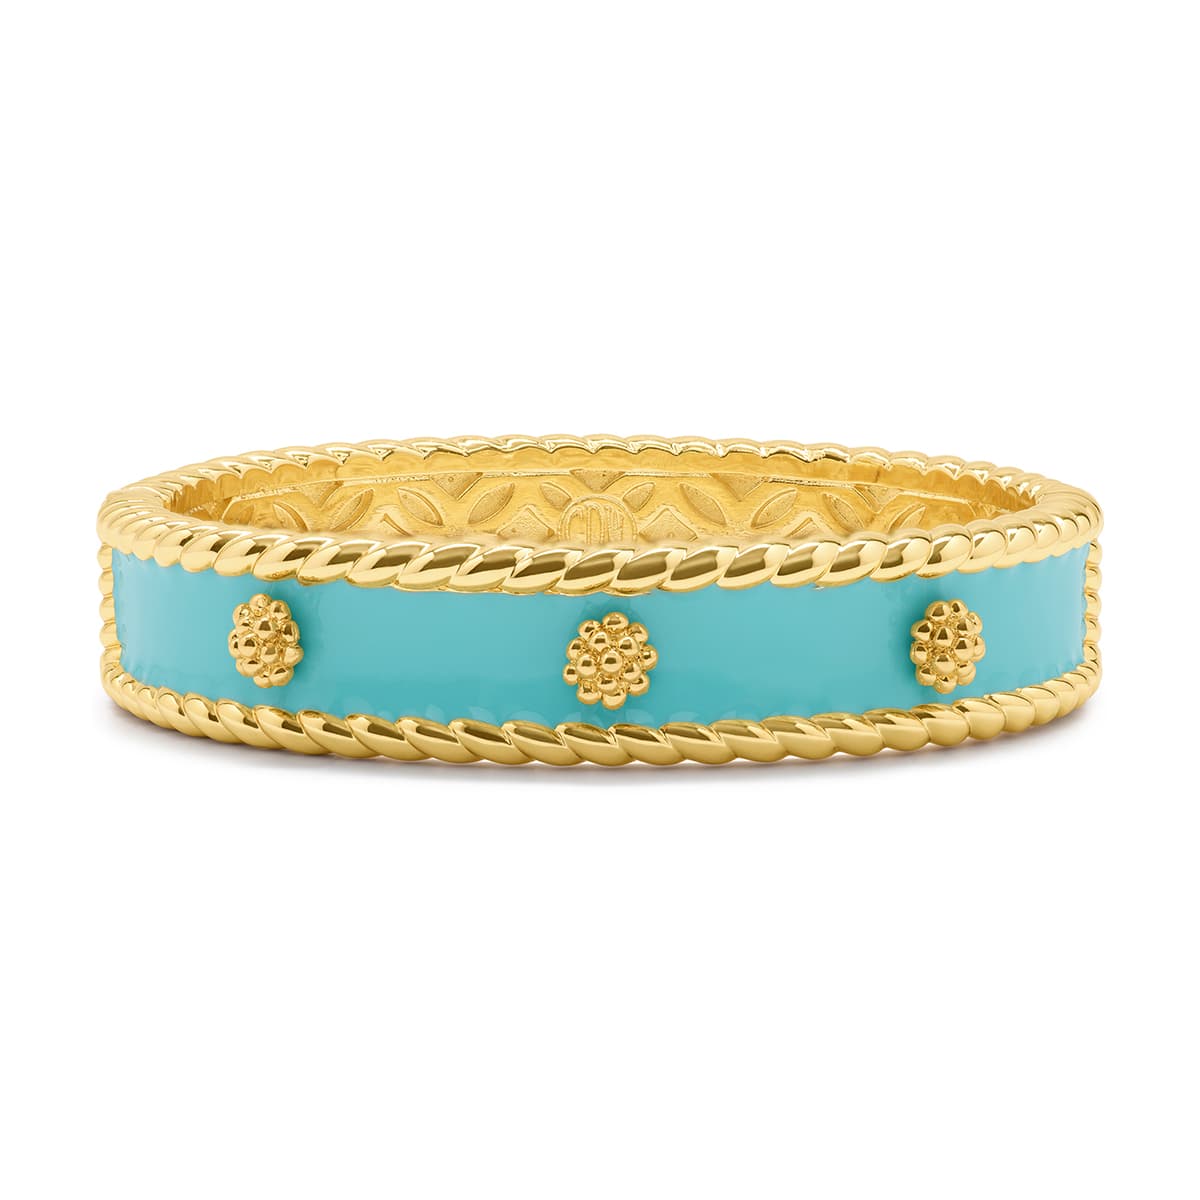 Berry Small Hinged Cuff - Turquoise